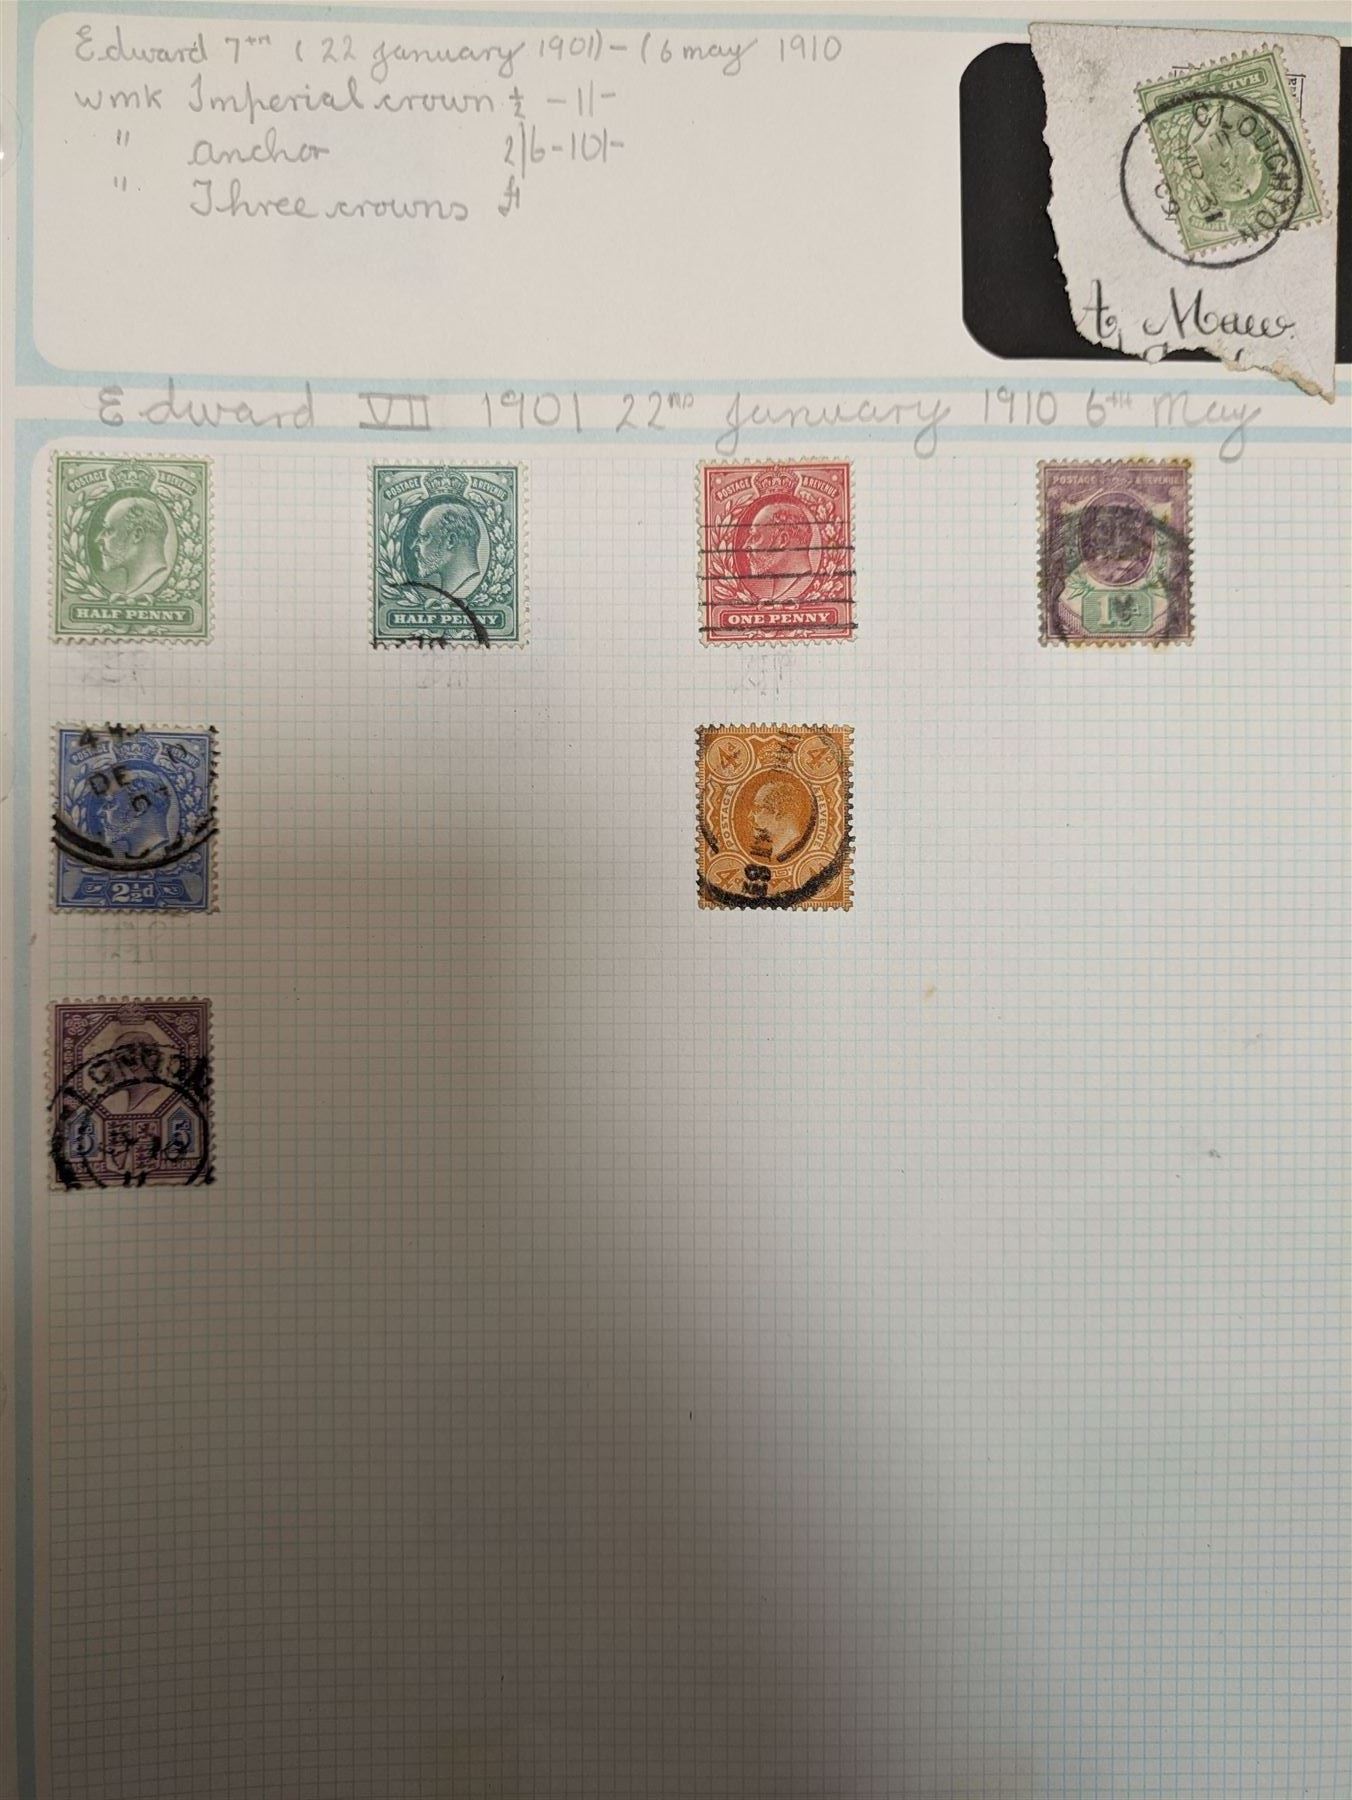 Mostly Great British stamps including Queen Victoria perf penny reds - Image 2 of 4